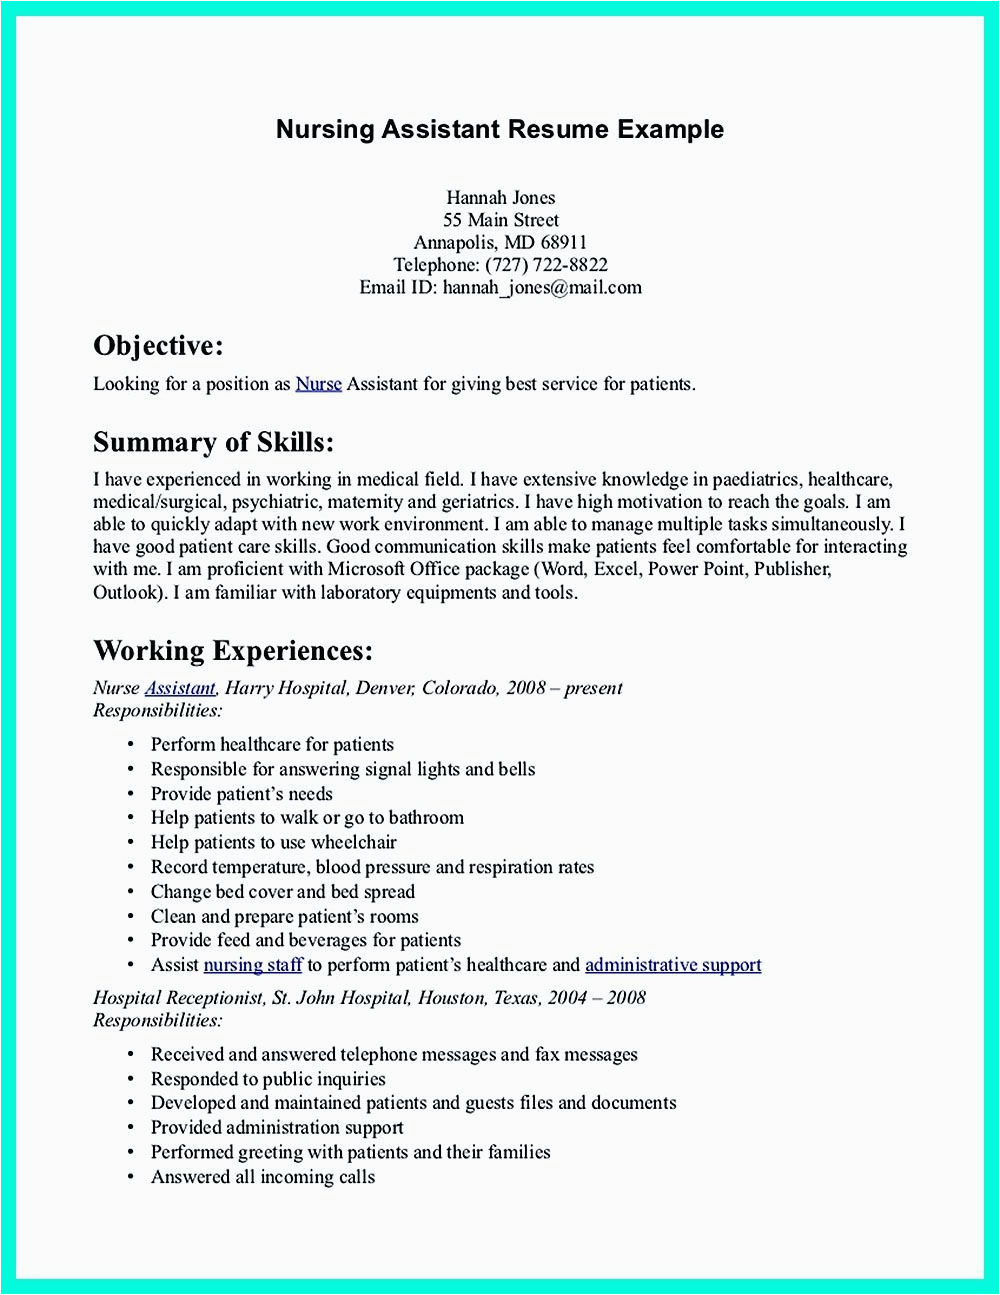 Quit My Job Resume Summary Samples Indeed Your Resume is too Short